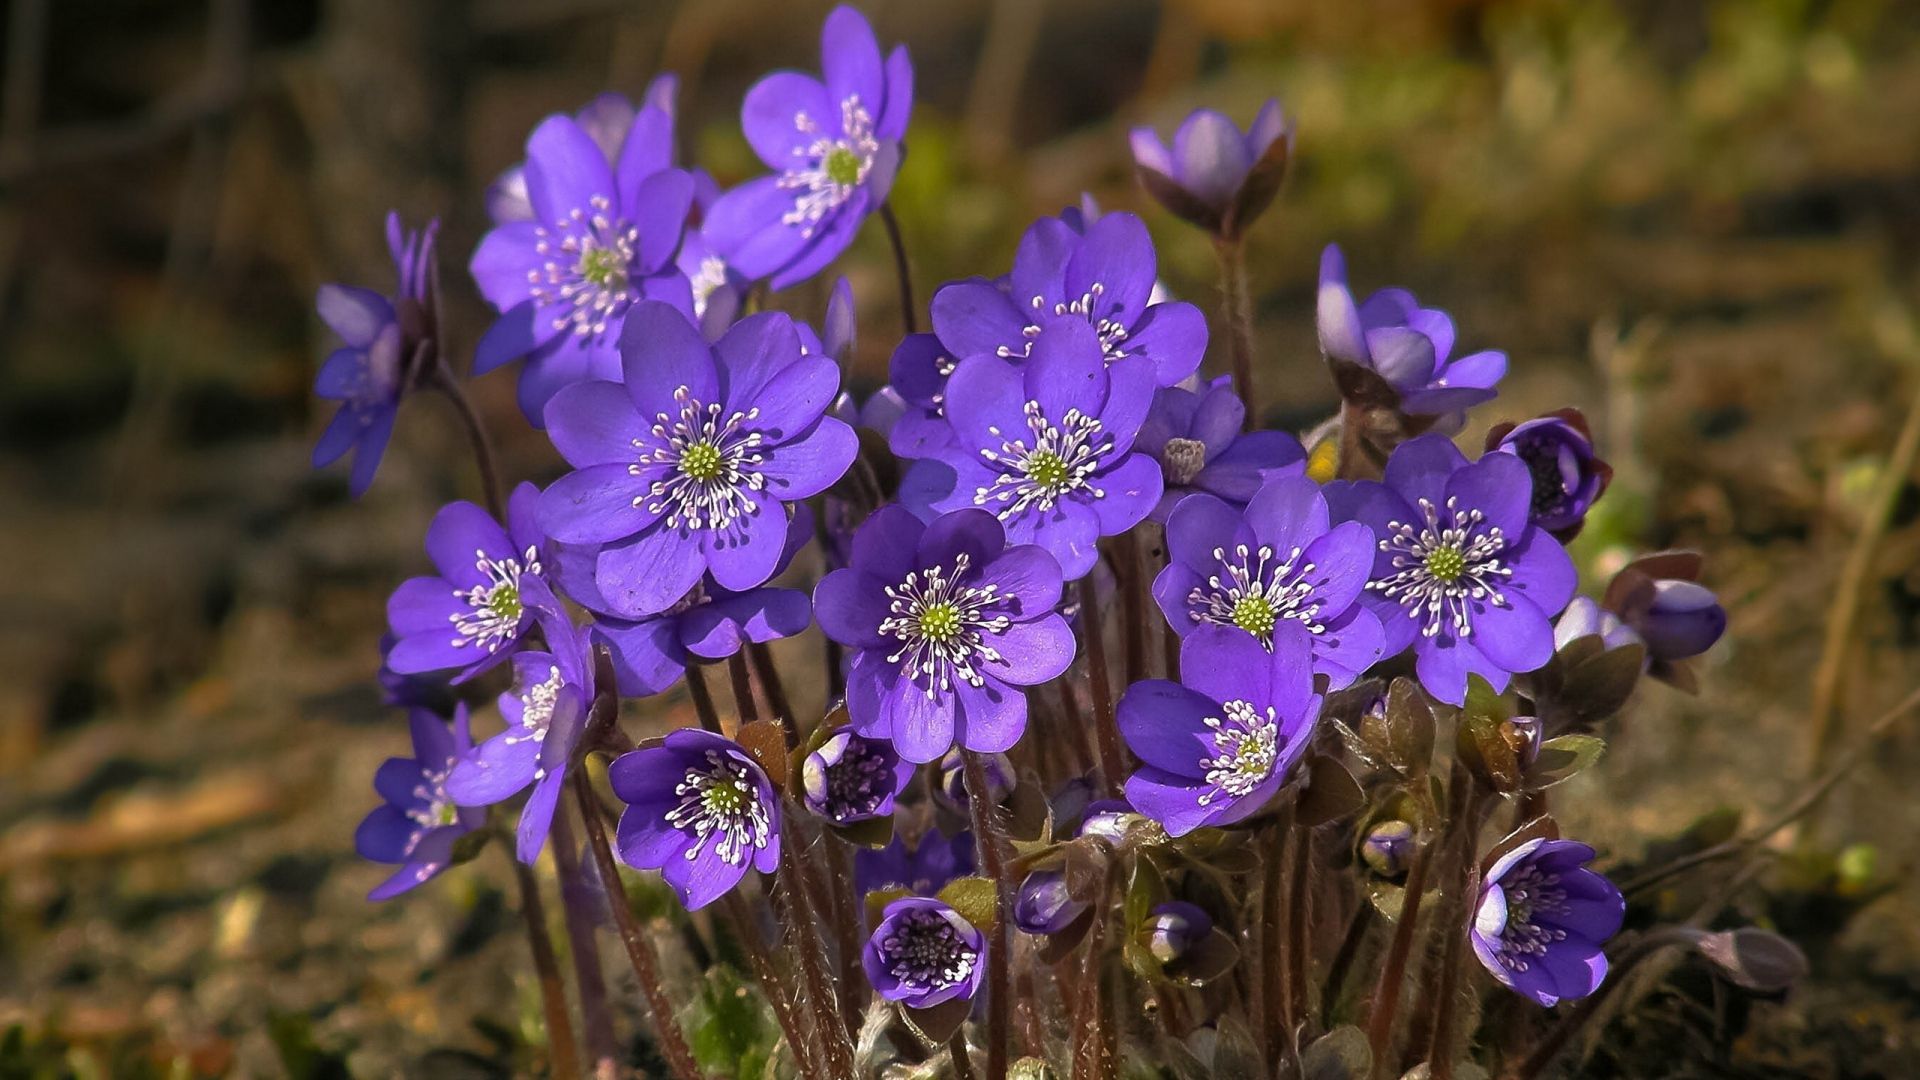 Download Wallpaper 1920x1080 violets, flowers, small, ground